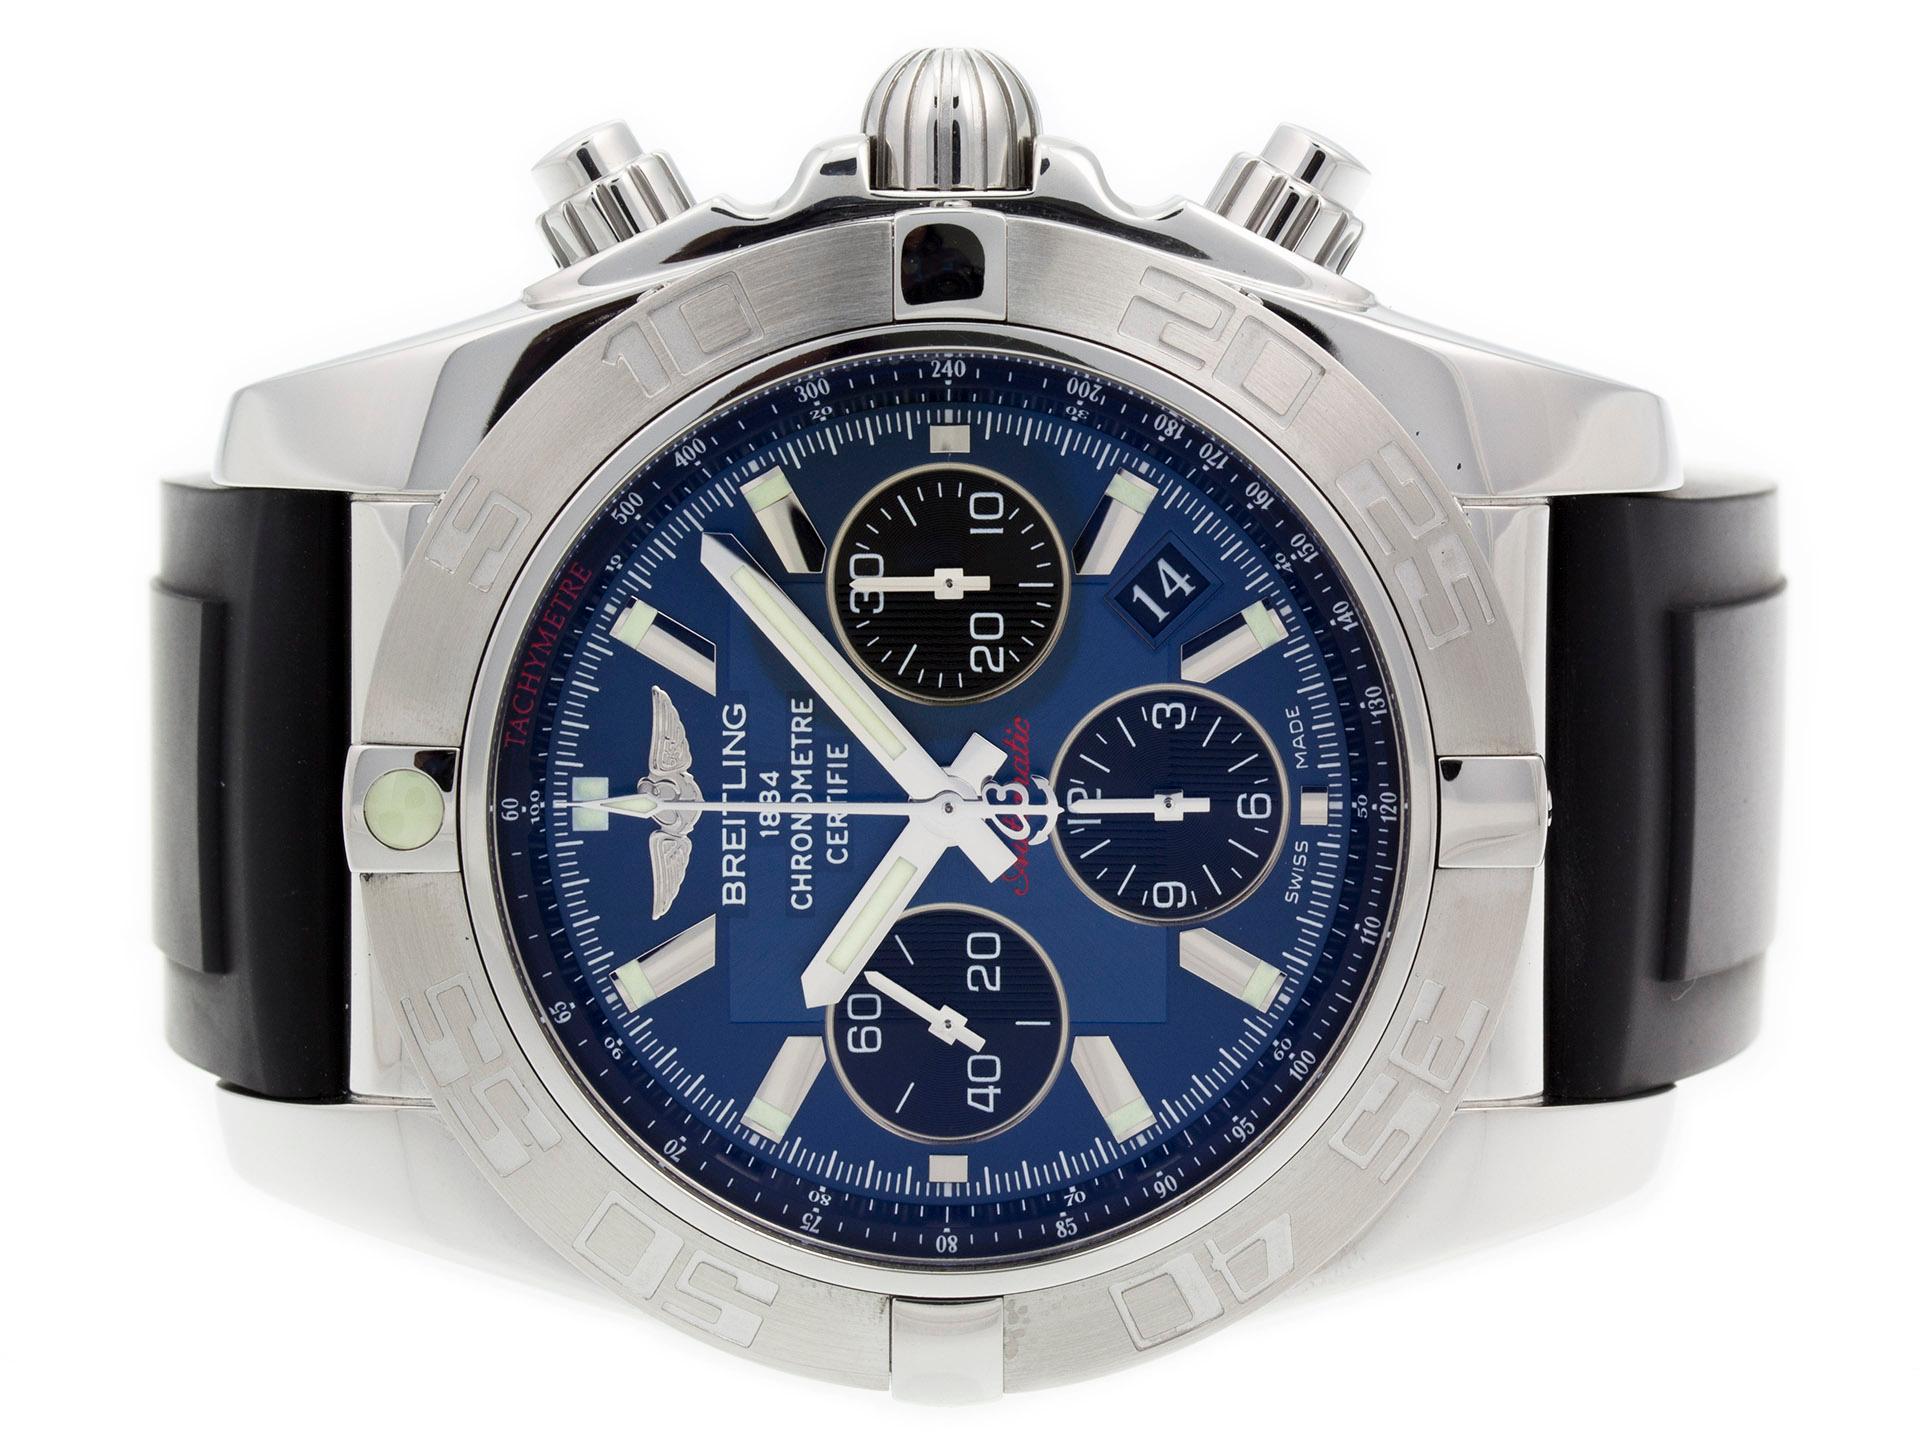 Breitling Chronomat 44 AB011011/C789 In Good Condition For Sale In Willow Grove, PA